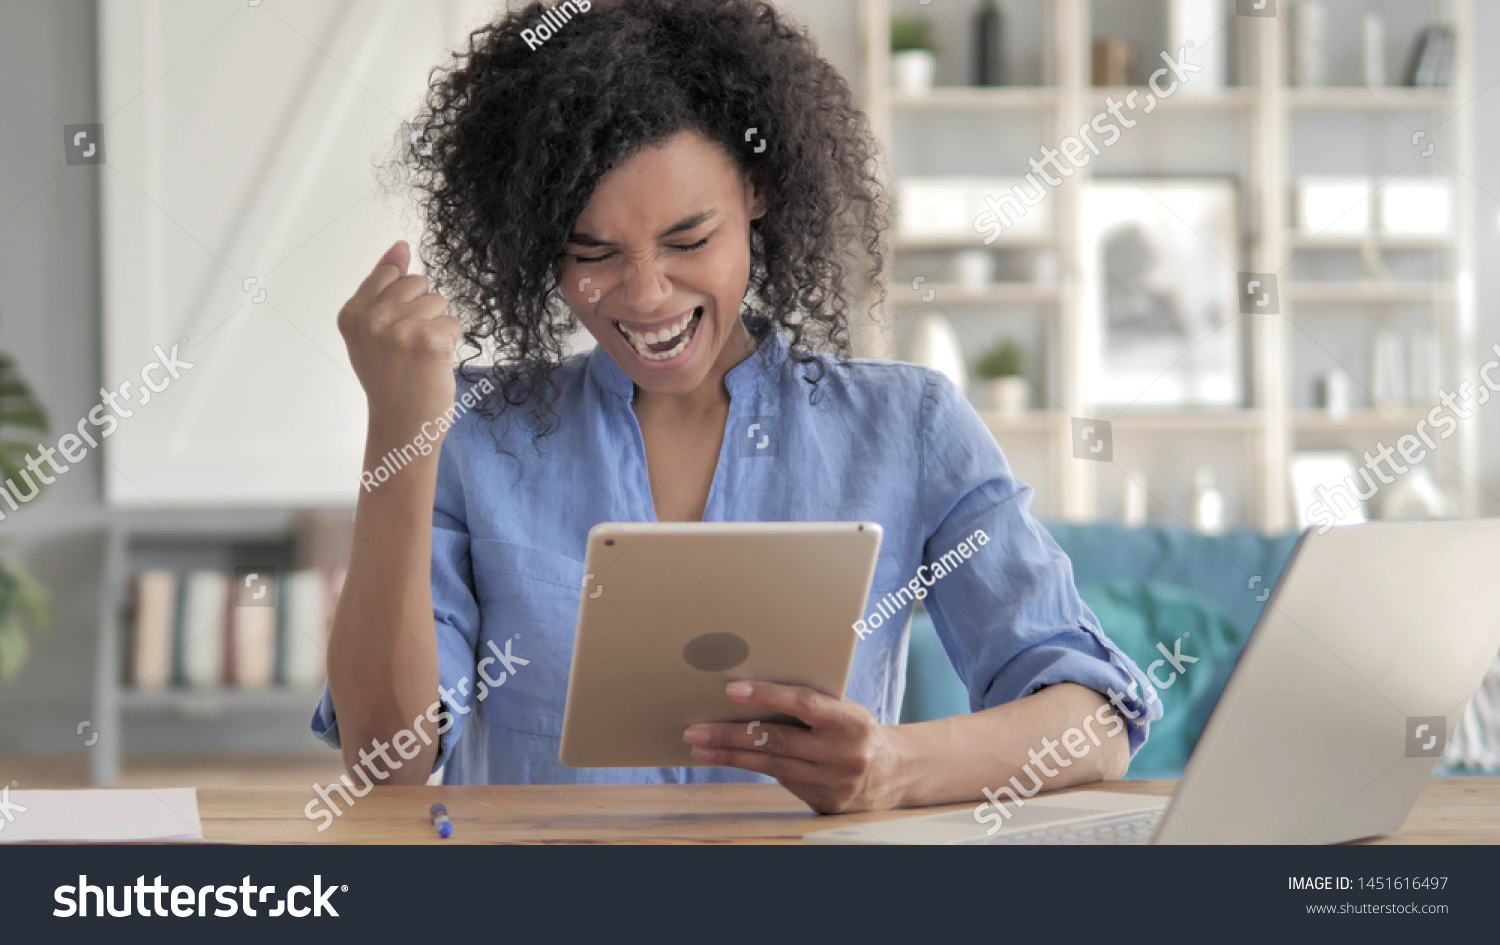 African Woman Celebrating Success on Tablet #1451616497